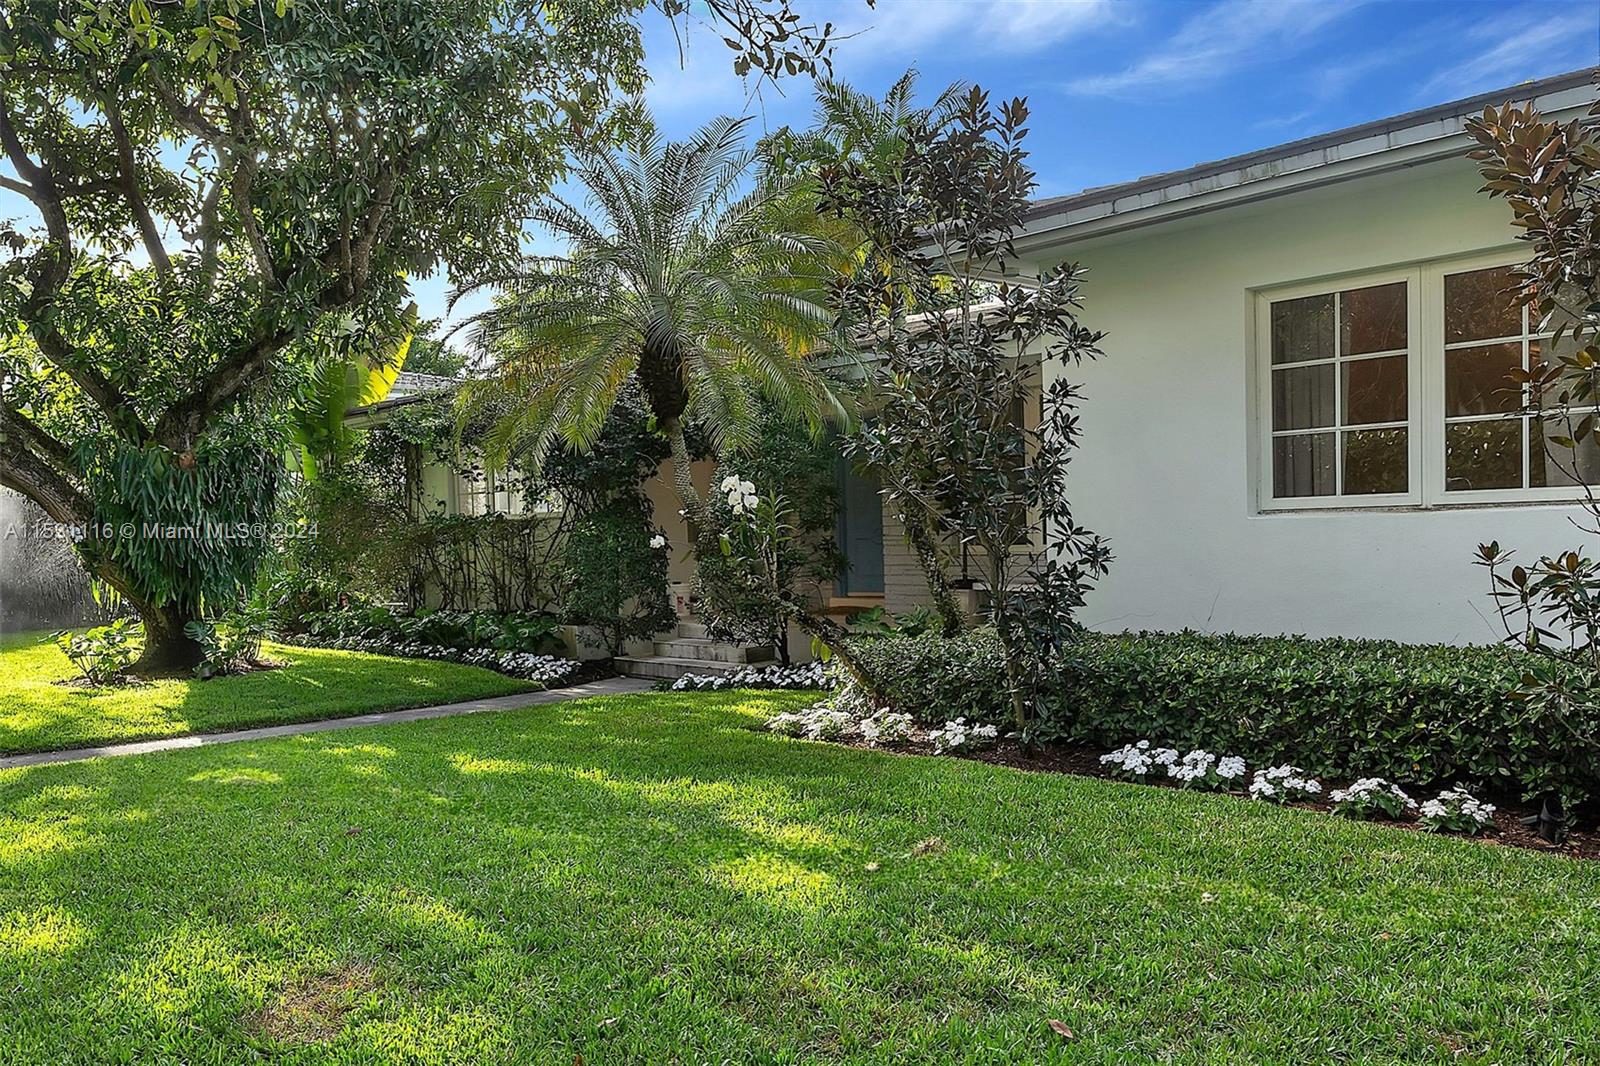 Charming open floor plan South Gables home. Home features a large size living/family area that can be used for multiple purposes. The bright open kitchen has Thermador appliances with a great cooking island and gas range; it also has a nice size walk in pantry. Off the kitchen there is a patio that can be turned into an ample sized outdoor area will a grill or summer kitchen .  This home features a split floor plan; the primary bedroom has a nice size bathroom with separate sinks, shower and tub, two walk in closets  with access to the back yard. The additional two bedrooms have a Jack and Jill bathroom. There is also an office/staff room with it's own bathroom adjacent to the two rooms. Home is in a great location, close to schools, and a short distance from South Miami and Coconut Grove.